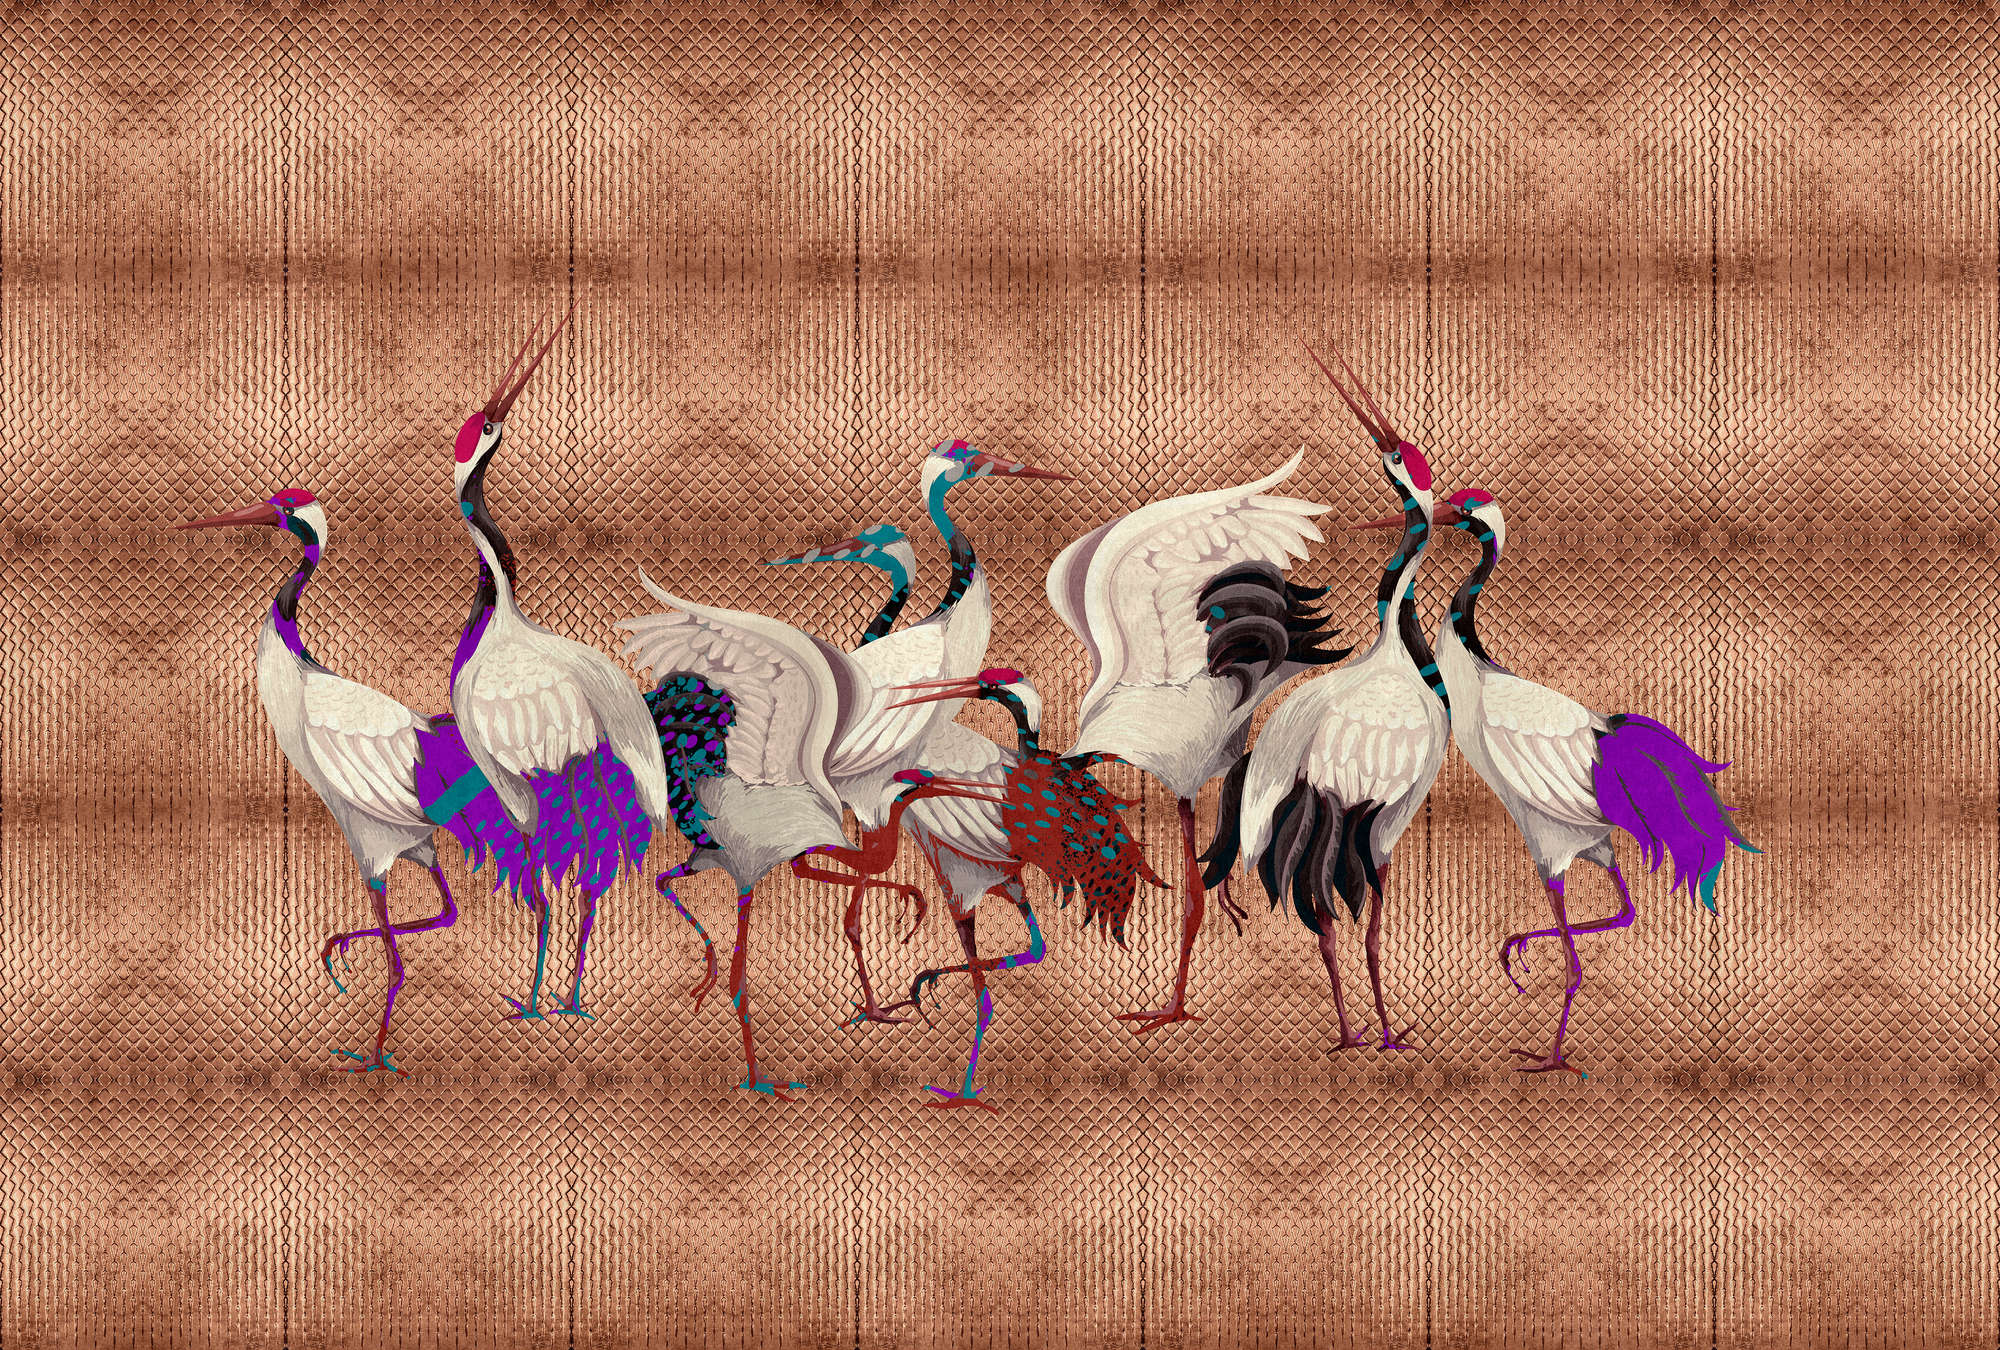             Land of Happiness 2 - Metallic copper wall mural with colourful crane motif
        